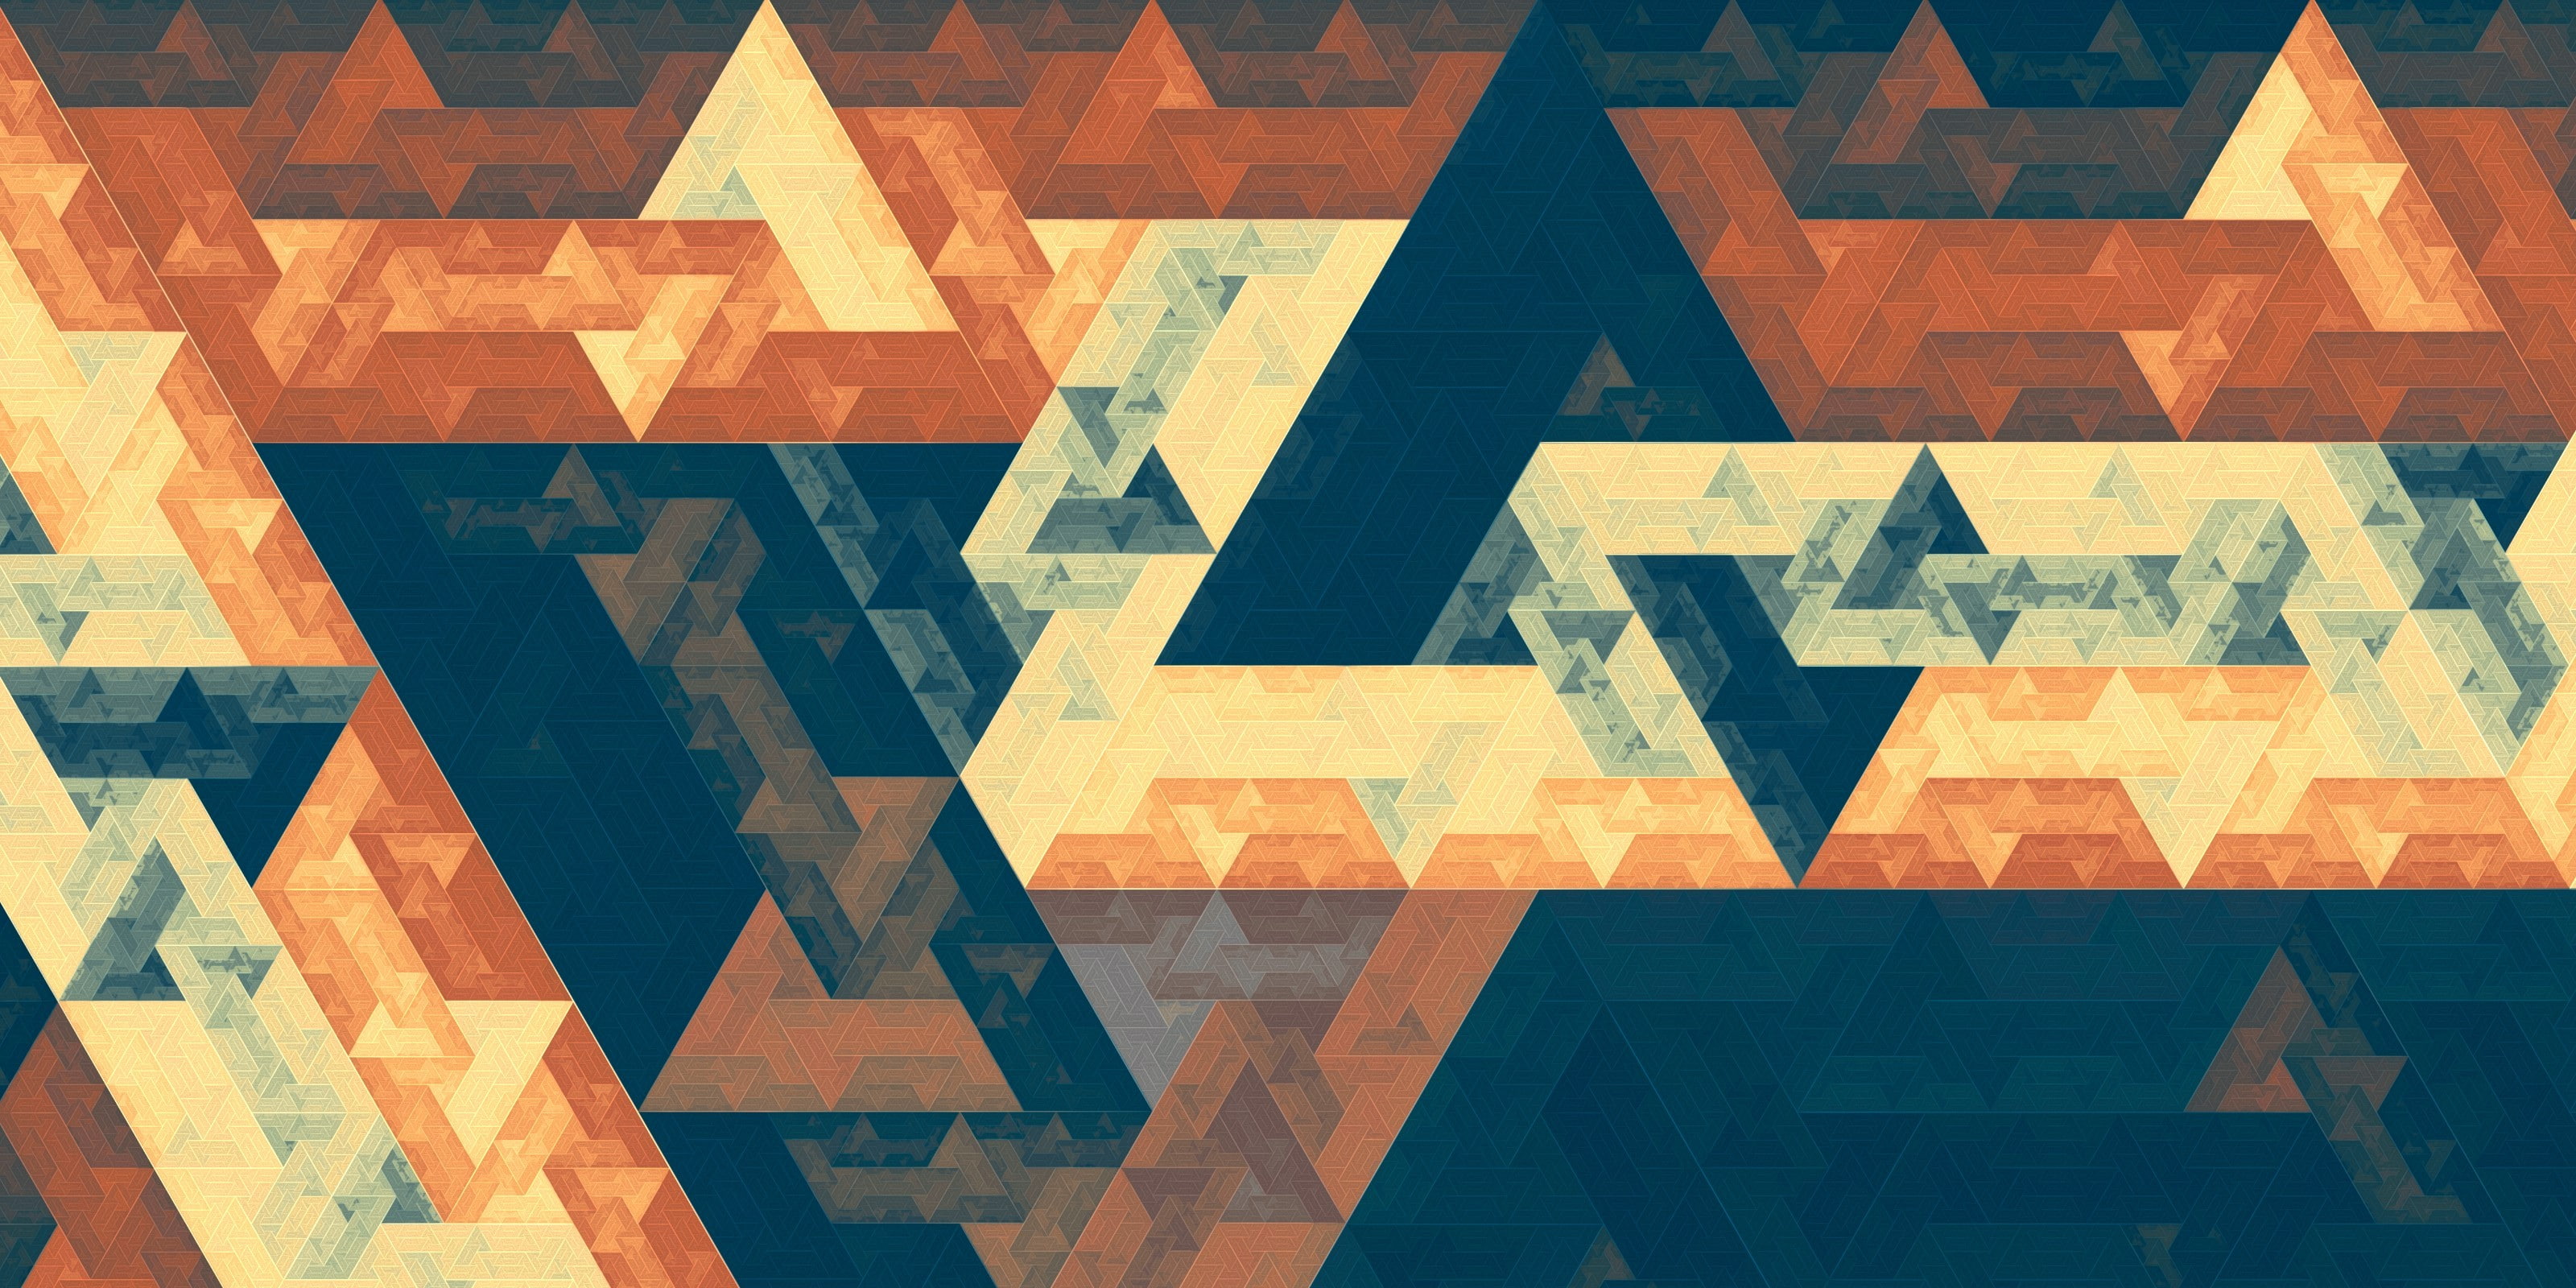 Fractal, Apophysis, Triangle, Digital Art, 3D, Abstract, blue orange and brown textile